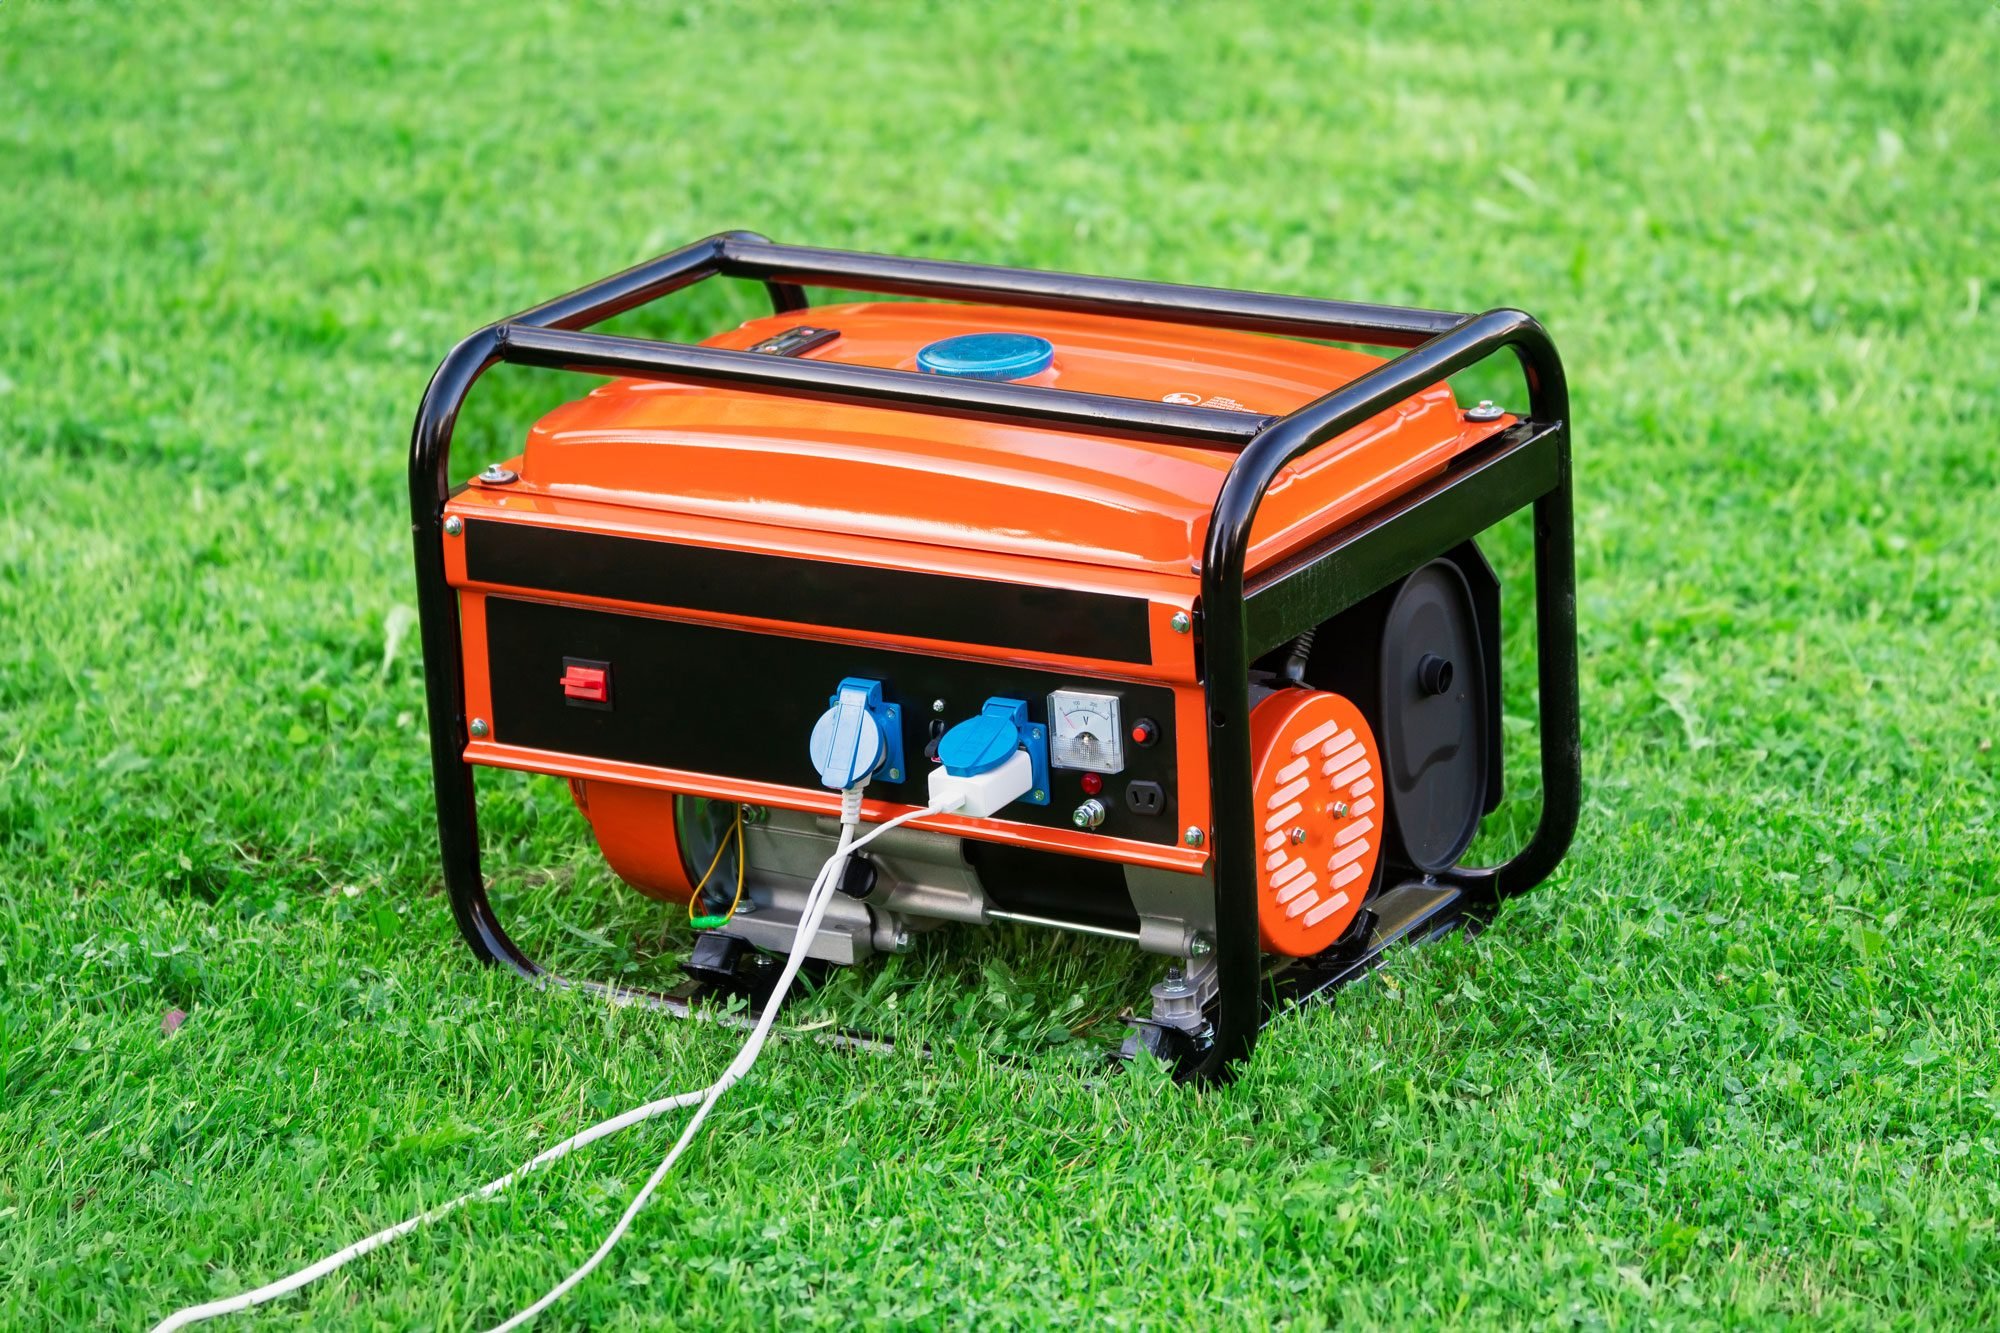 How to Use a Portable Generator Safely During an Emergency